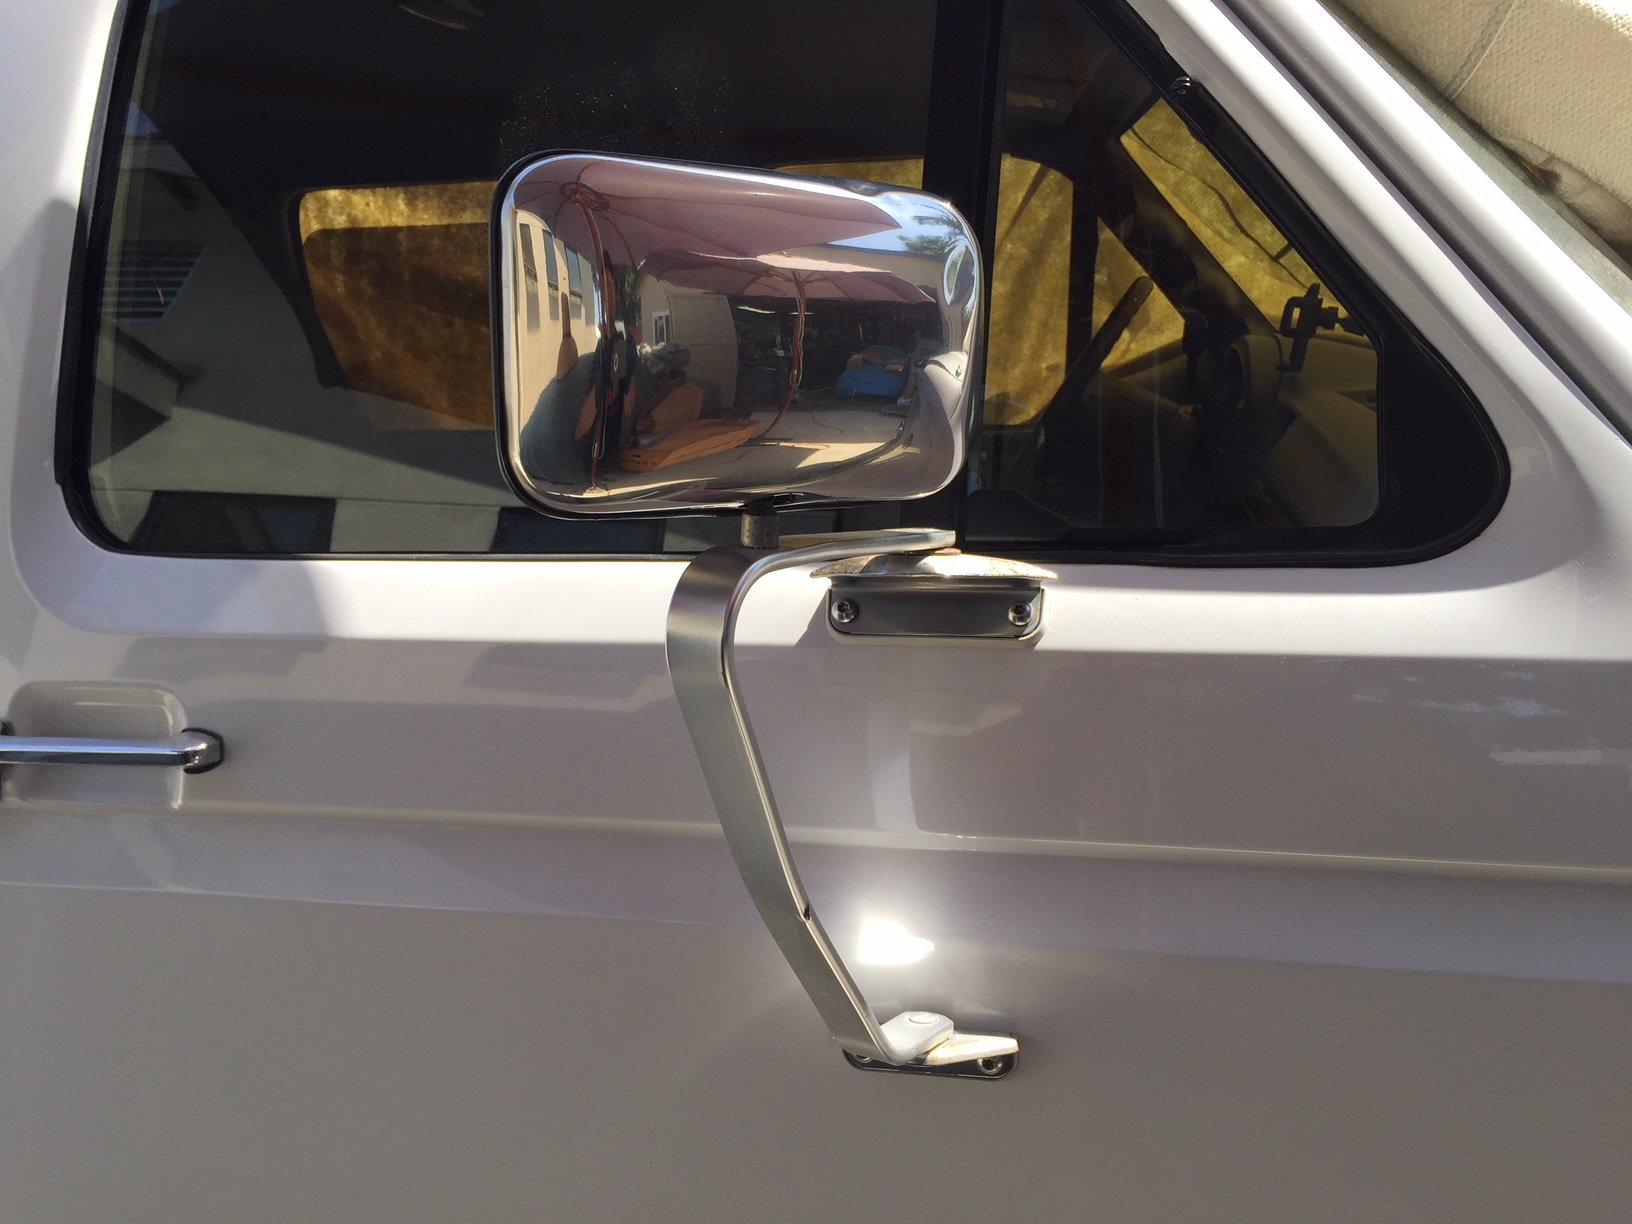 Exterior Body Parts - OBS Swing Away Mirrors - New or Used - 1979 to 1997 Ford F Series - Fountain Valley, CA 92708, United States